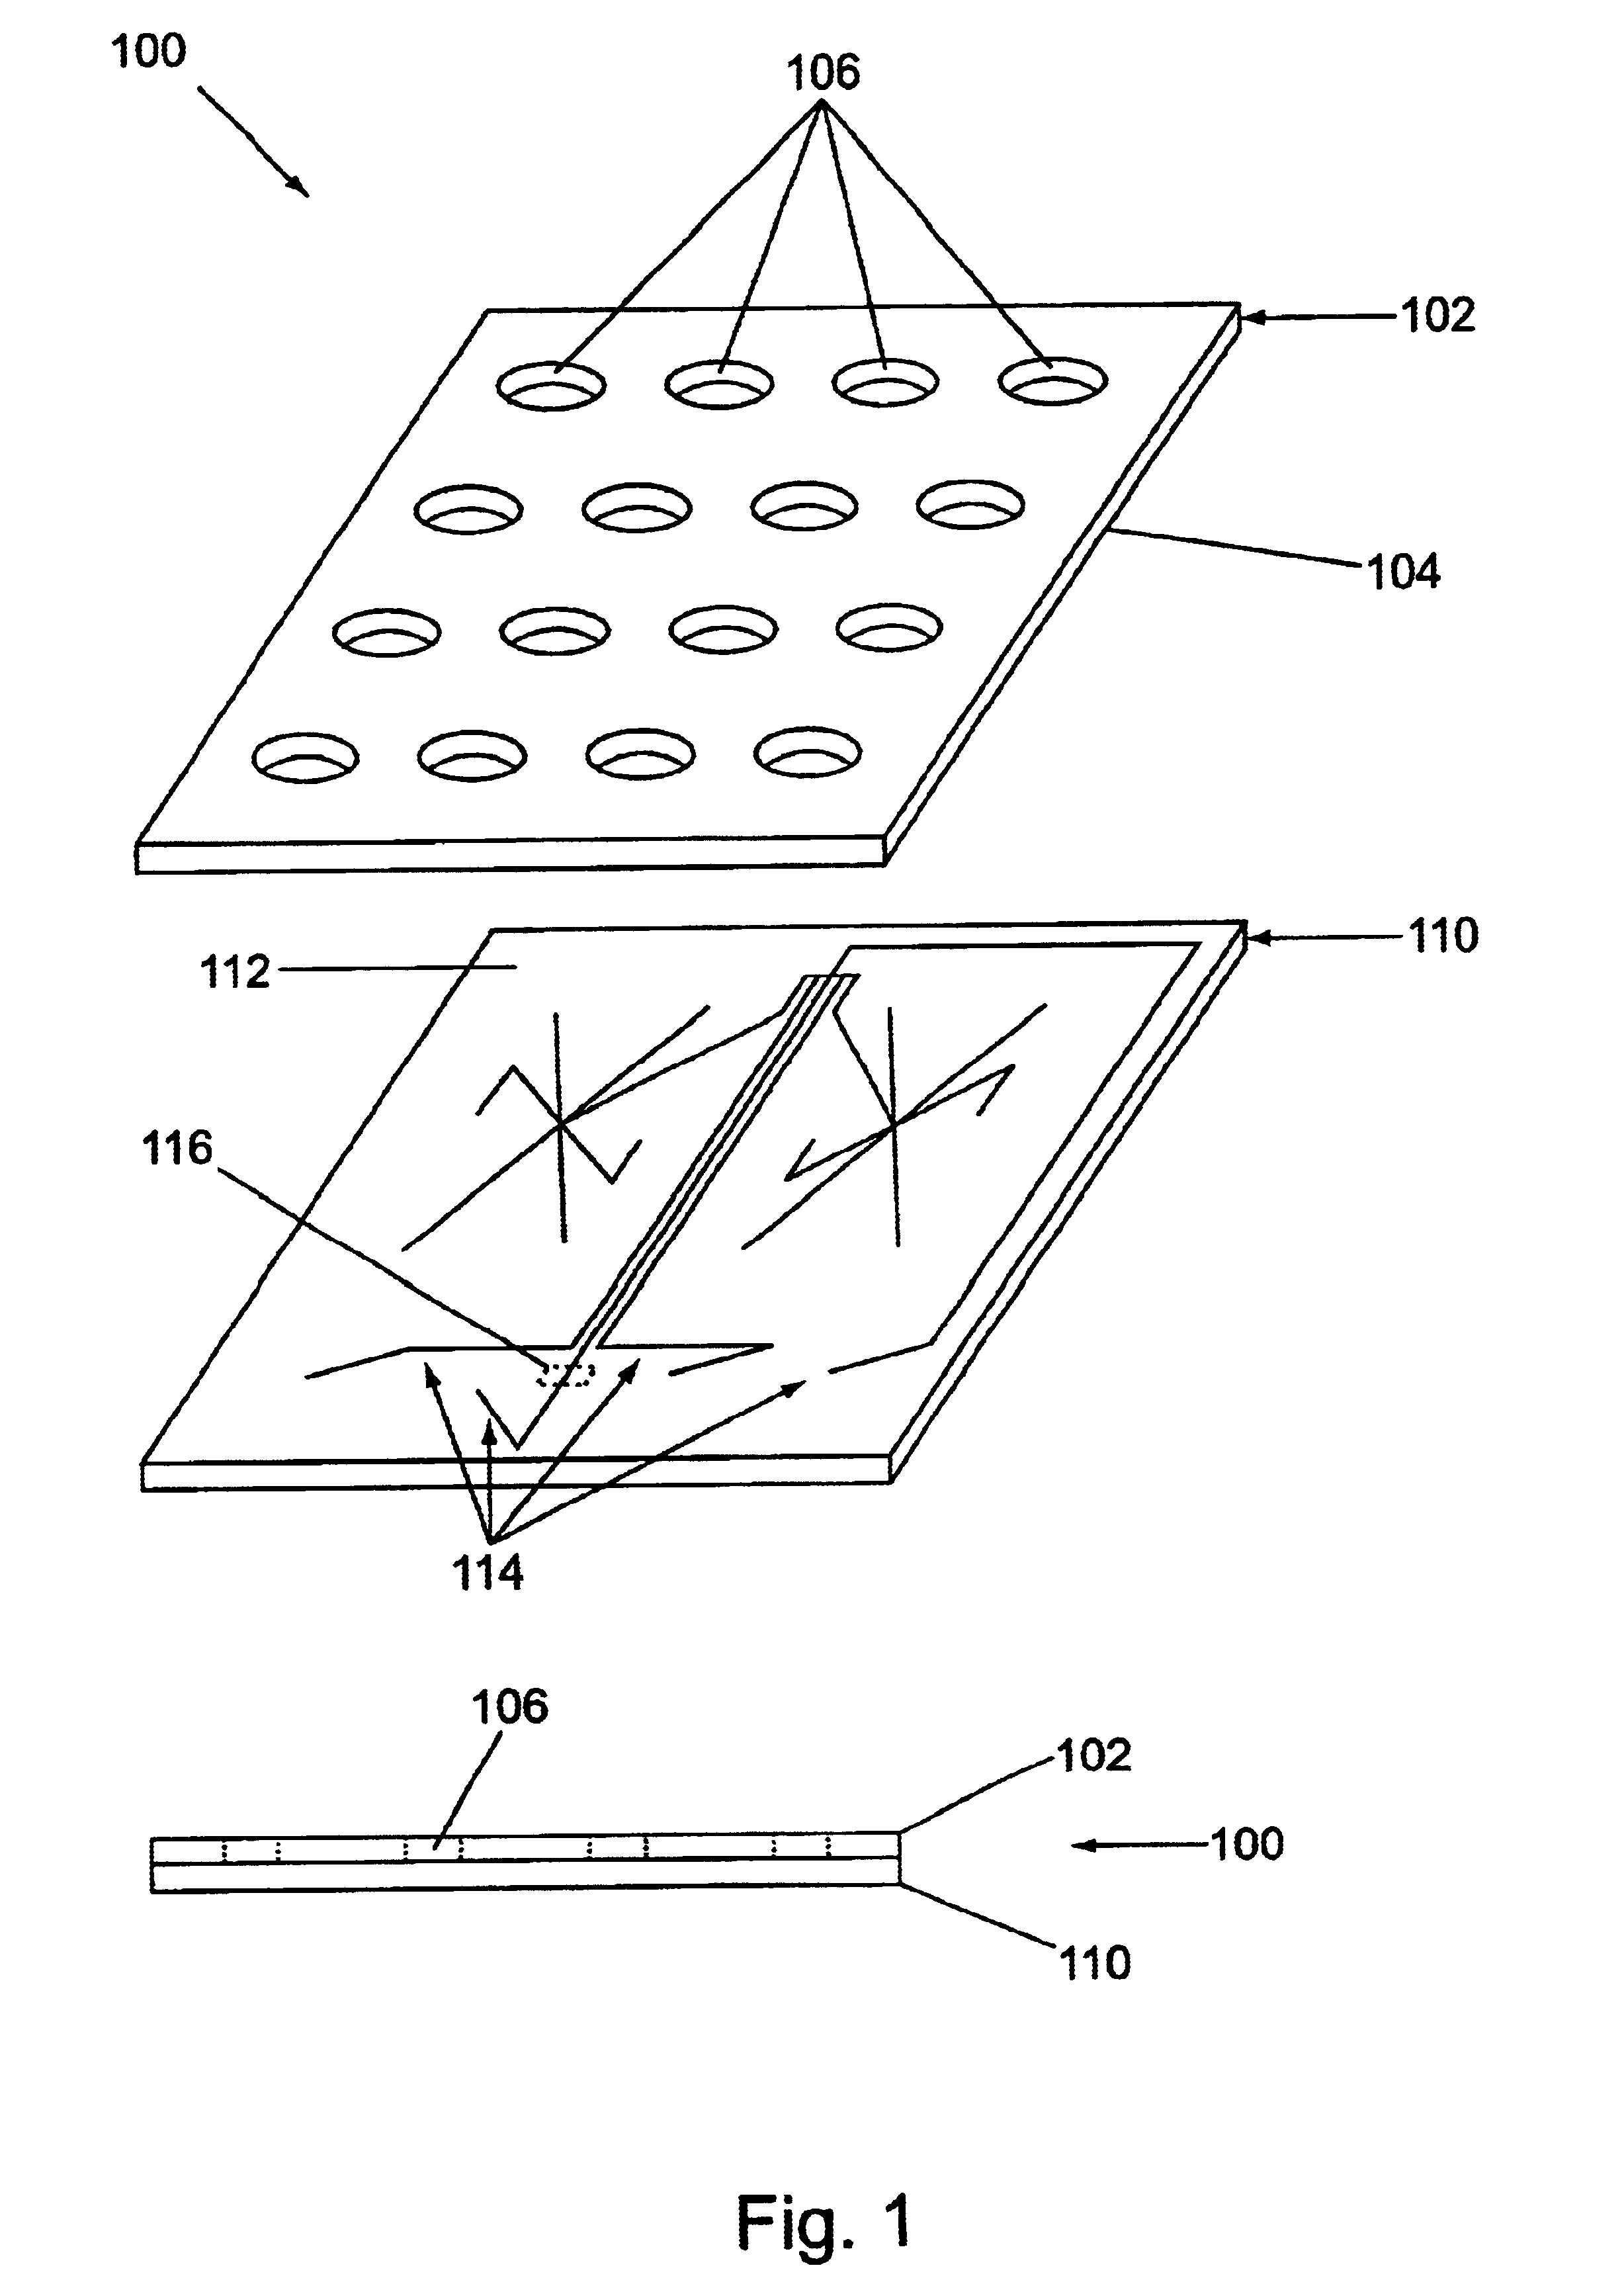 Microfluidic devices and systems incorporating cover layers